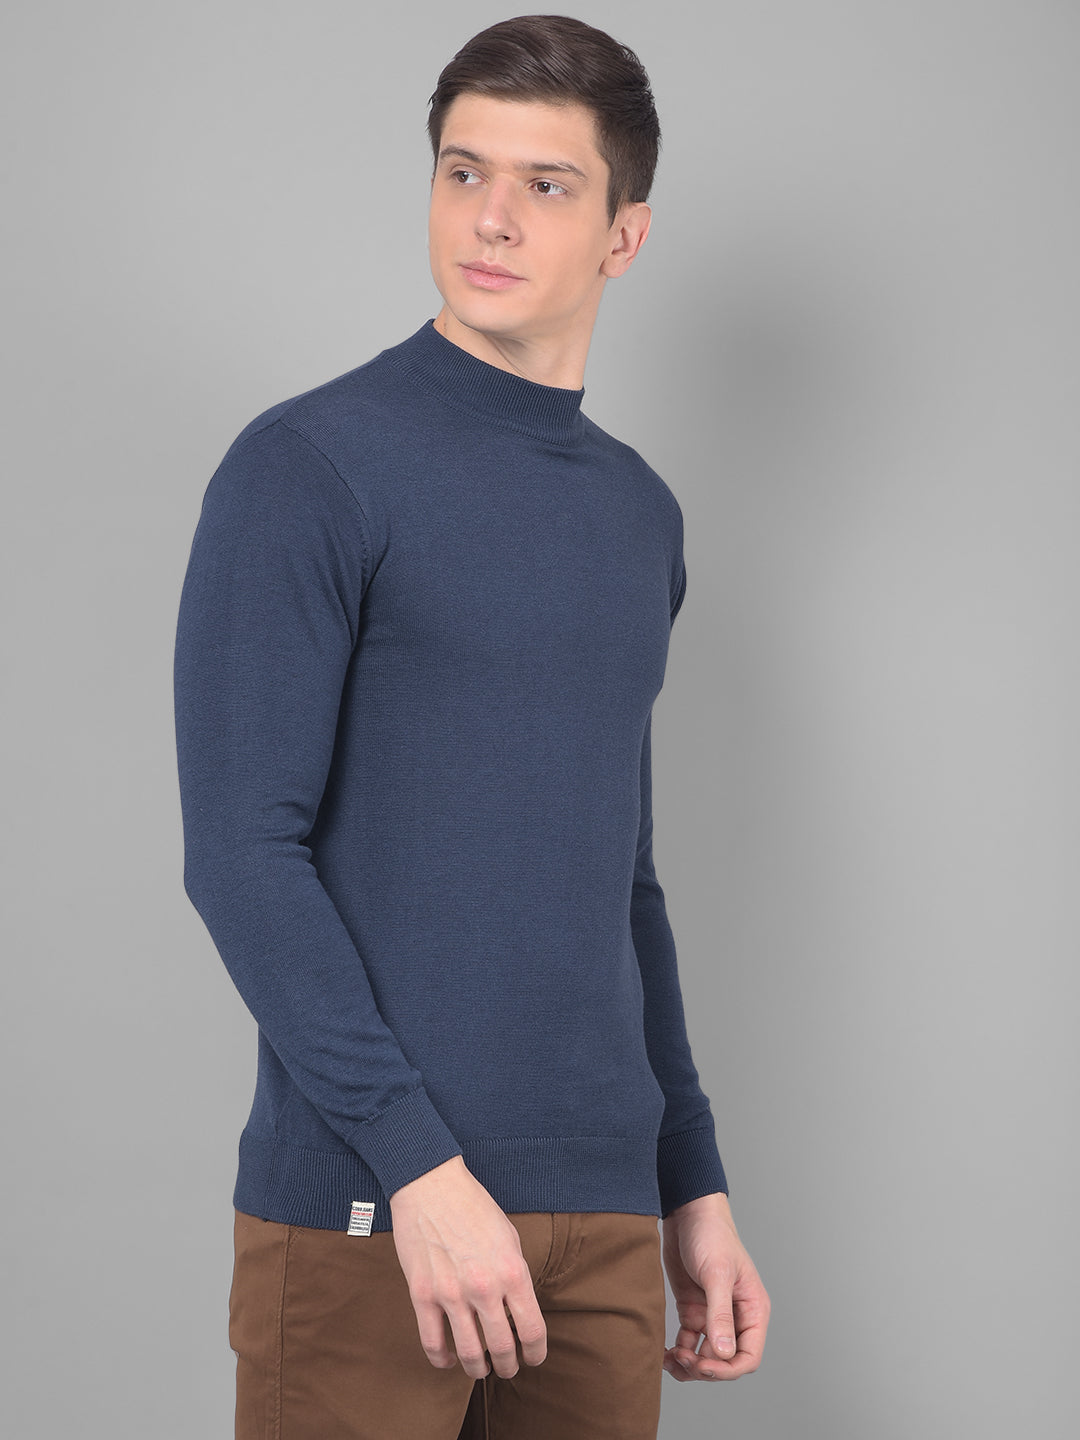 cobb solid navy blue high neck sweater